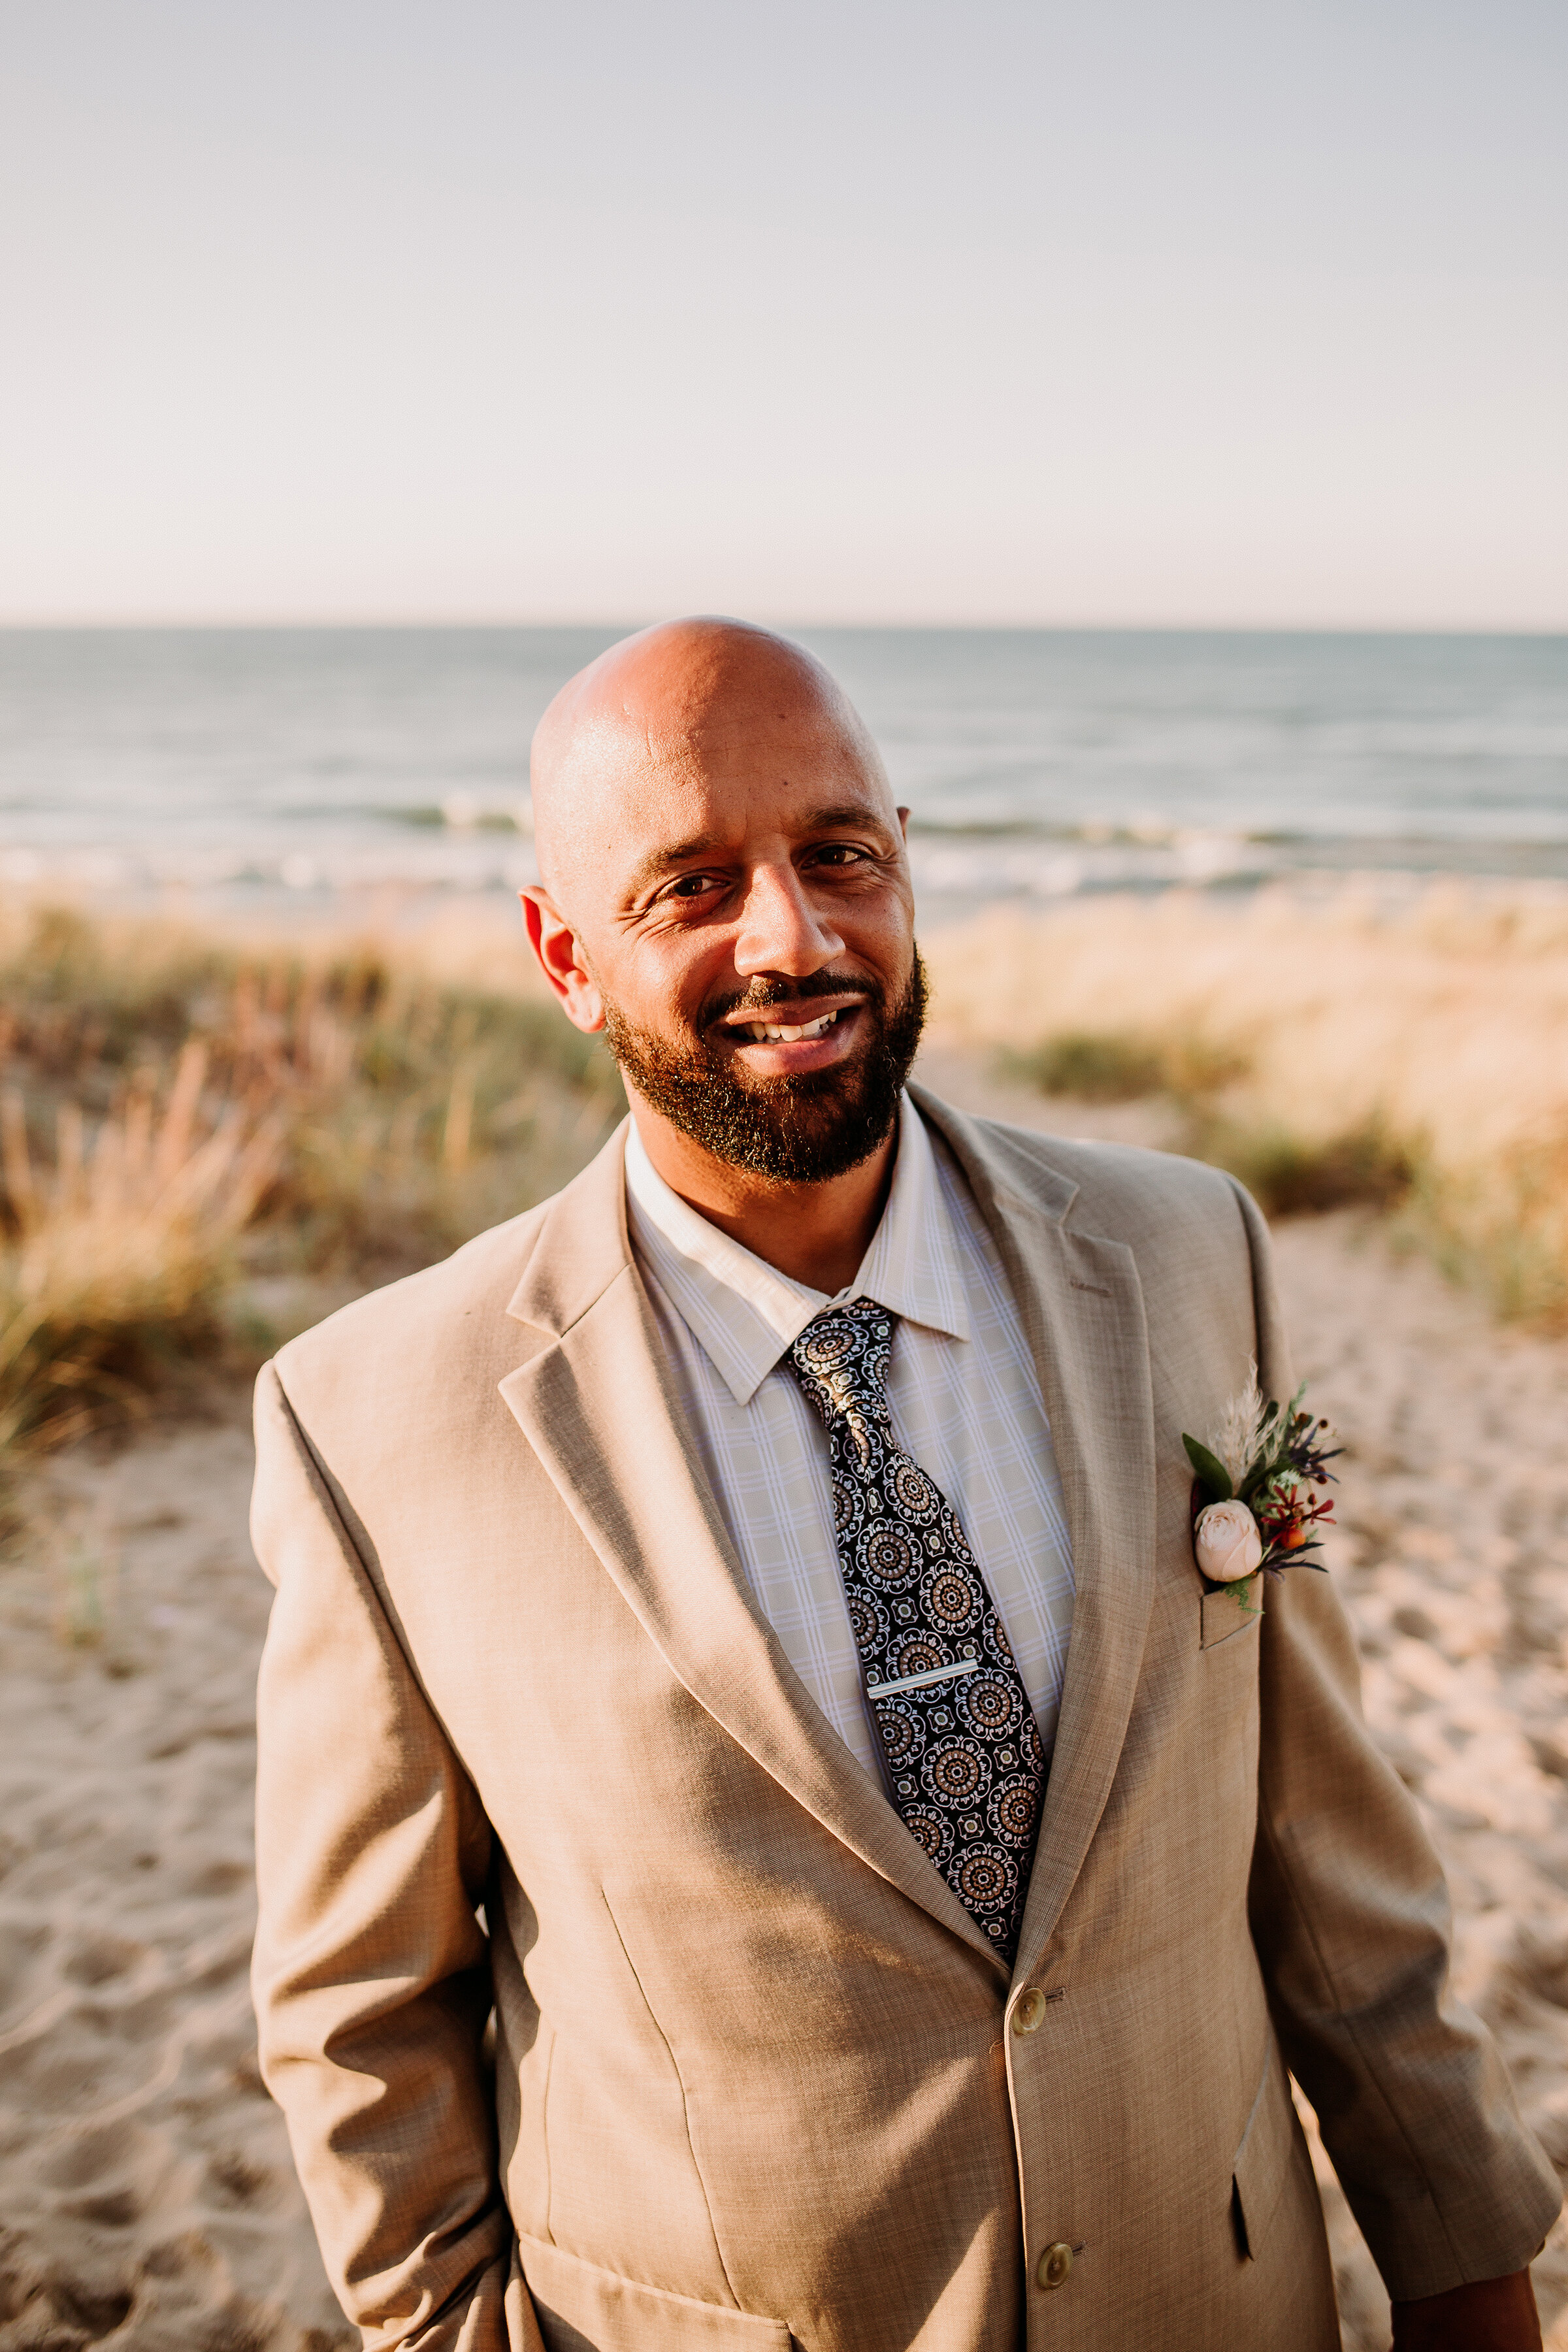  Groom to be styled for this boho elopement shoot on the shores of Lake Michigan in Indiana Dunes State Park. Groom to be tan suit boho chic tie boho boutonniere Lake Michigan beach wedding elopement photography beach styled shoot Valparaiso Indiana 